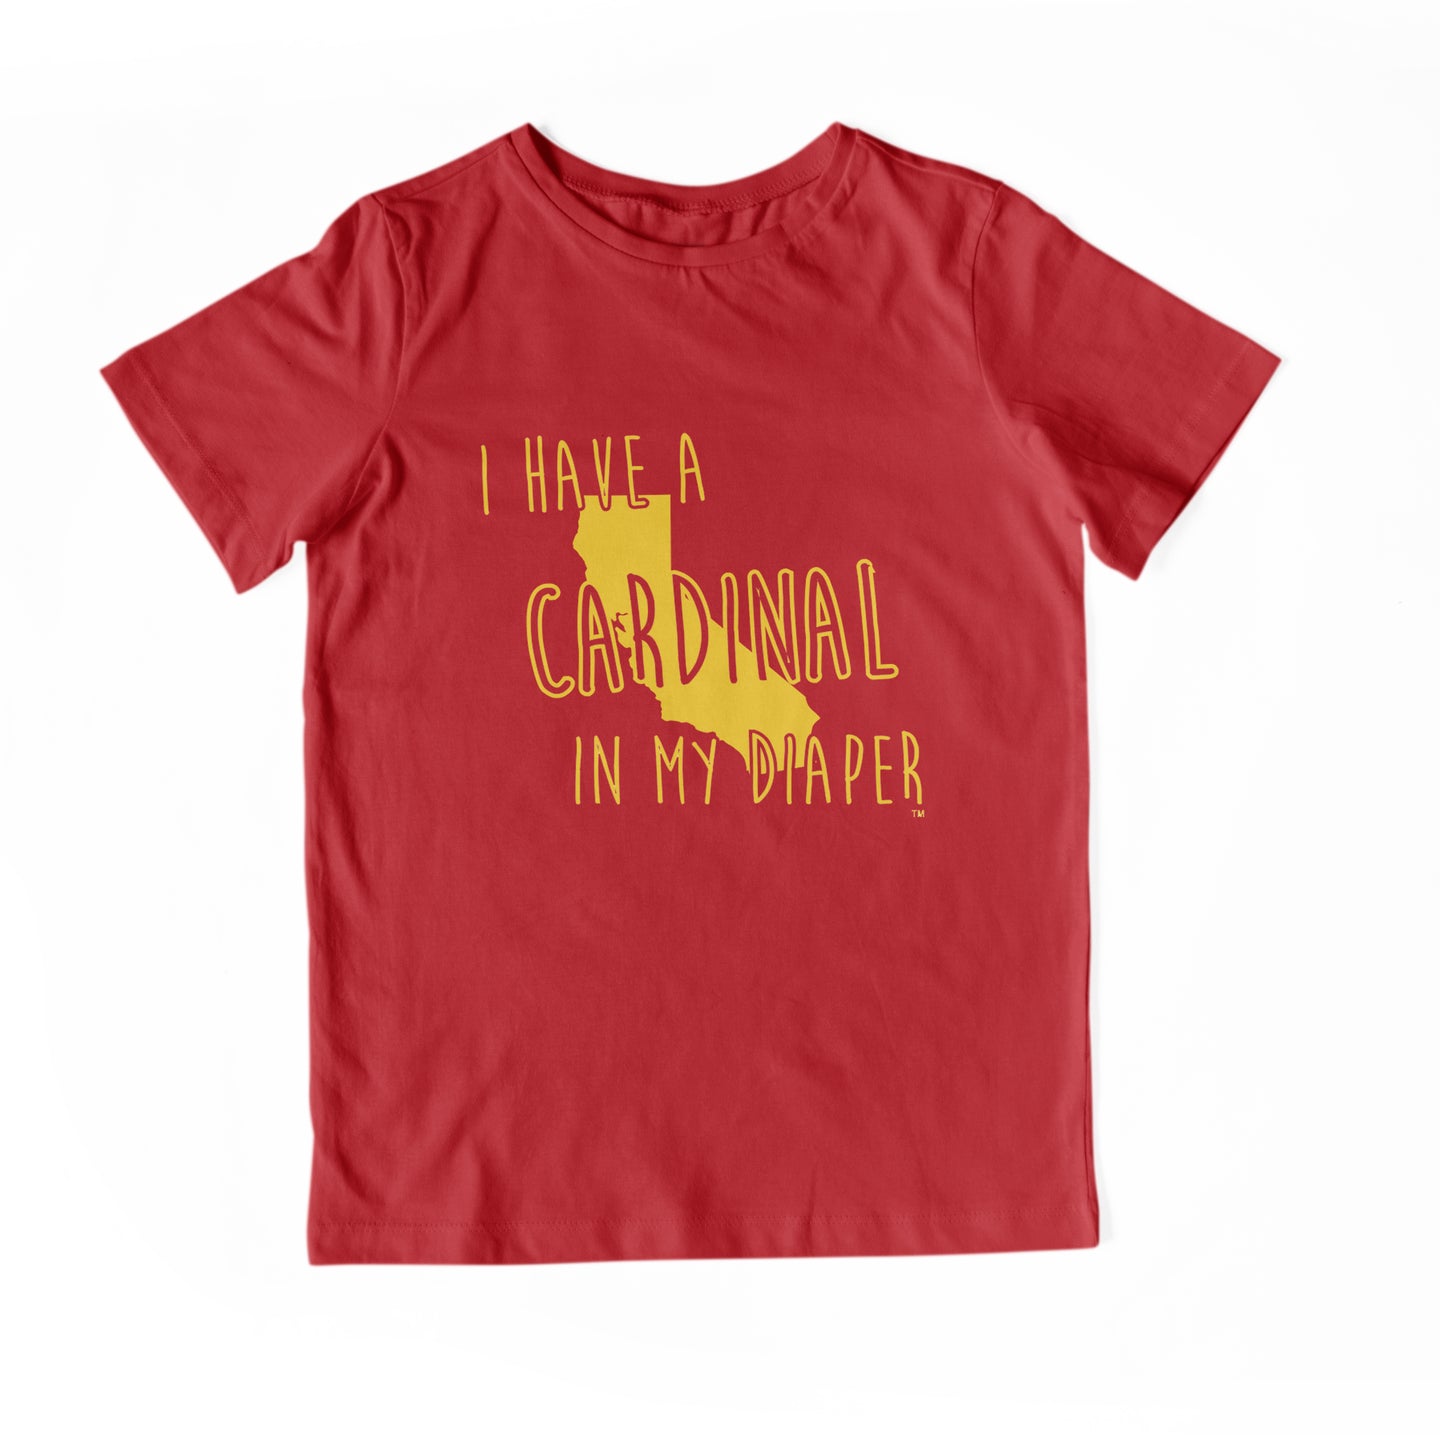 I HAVE A CARDINAL IN MY DIAPER Child Tee